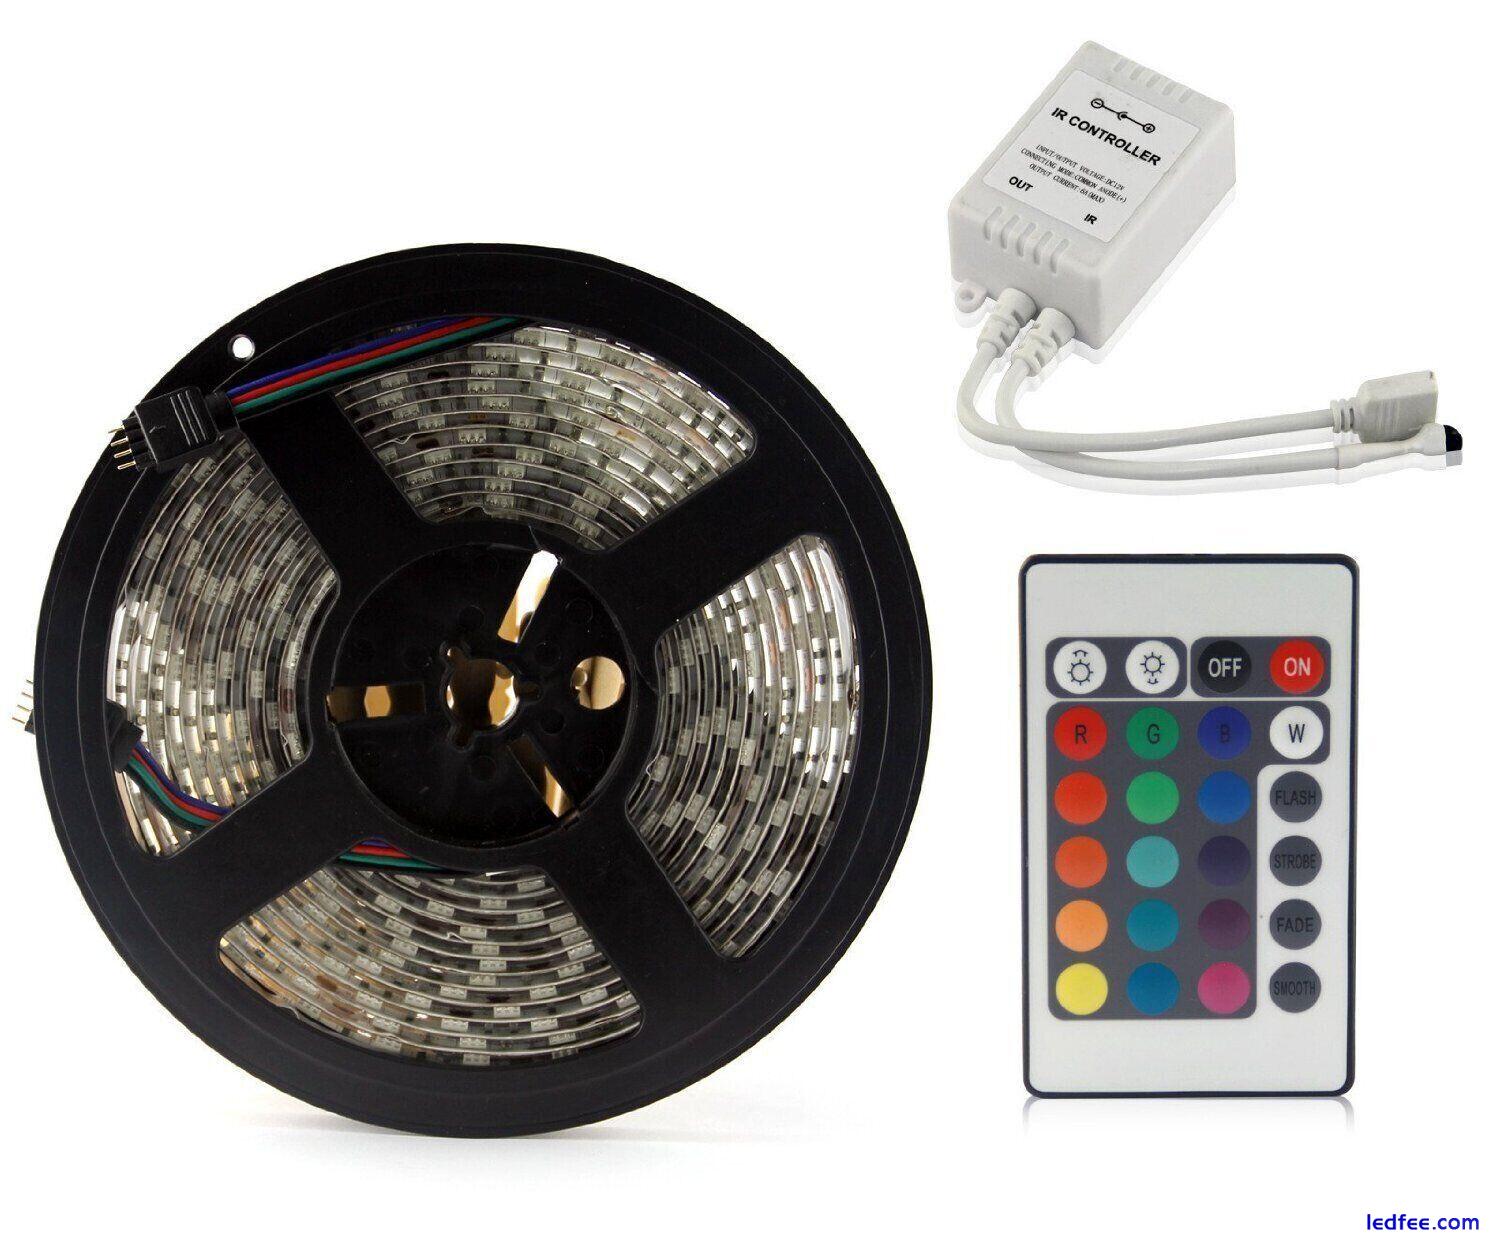 LED Strip Light 5M Dimmable RGB Colour Changing TV BackLight Bed Light + Remote 2 